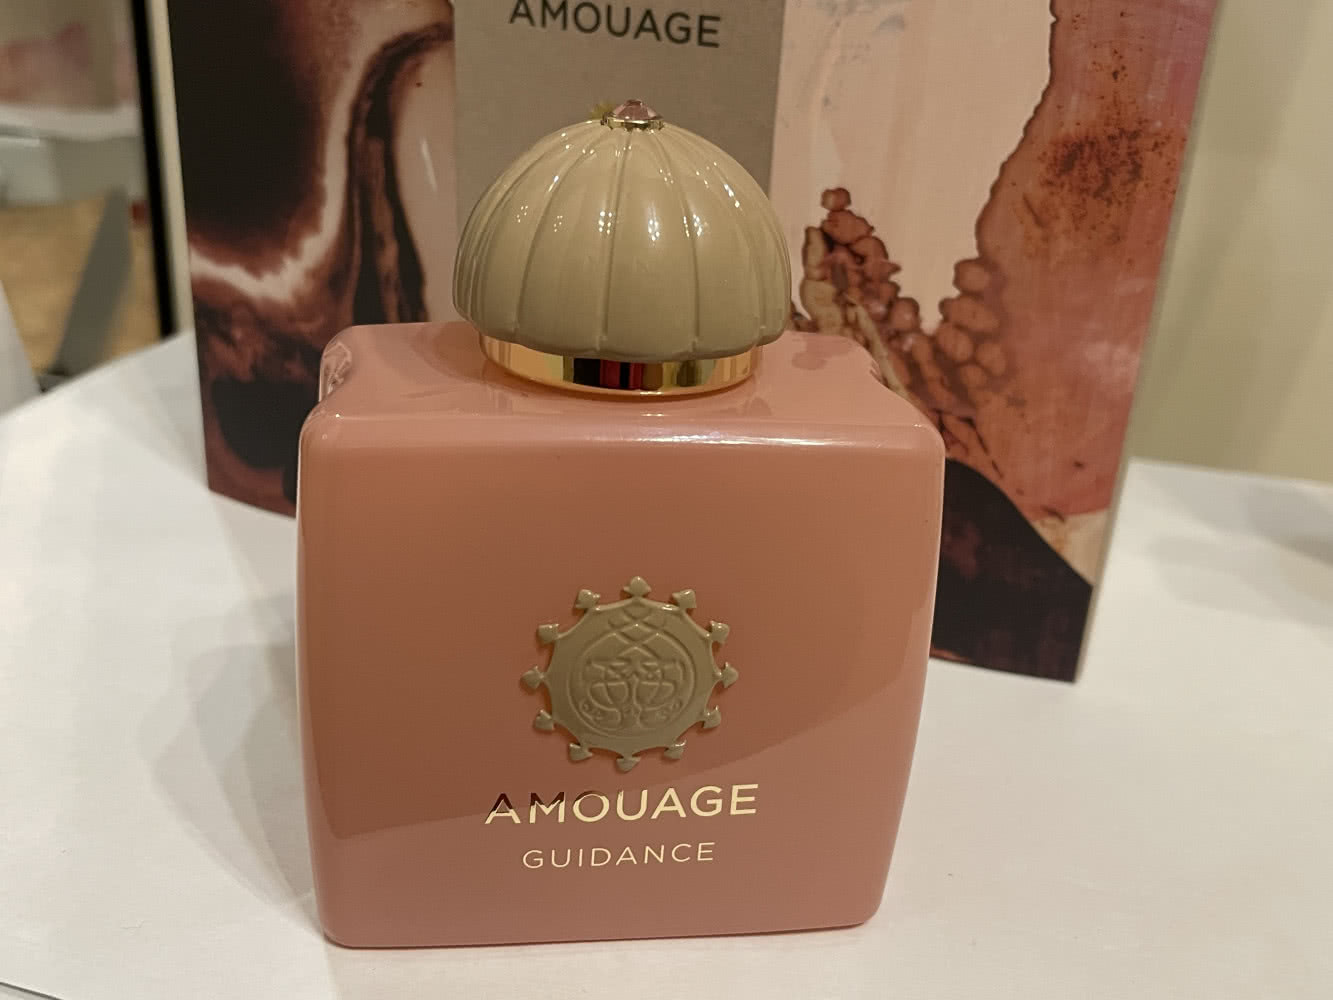 Guidance, Amouage делюсь 300 р/1 мл